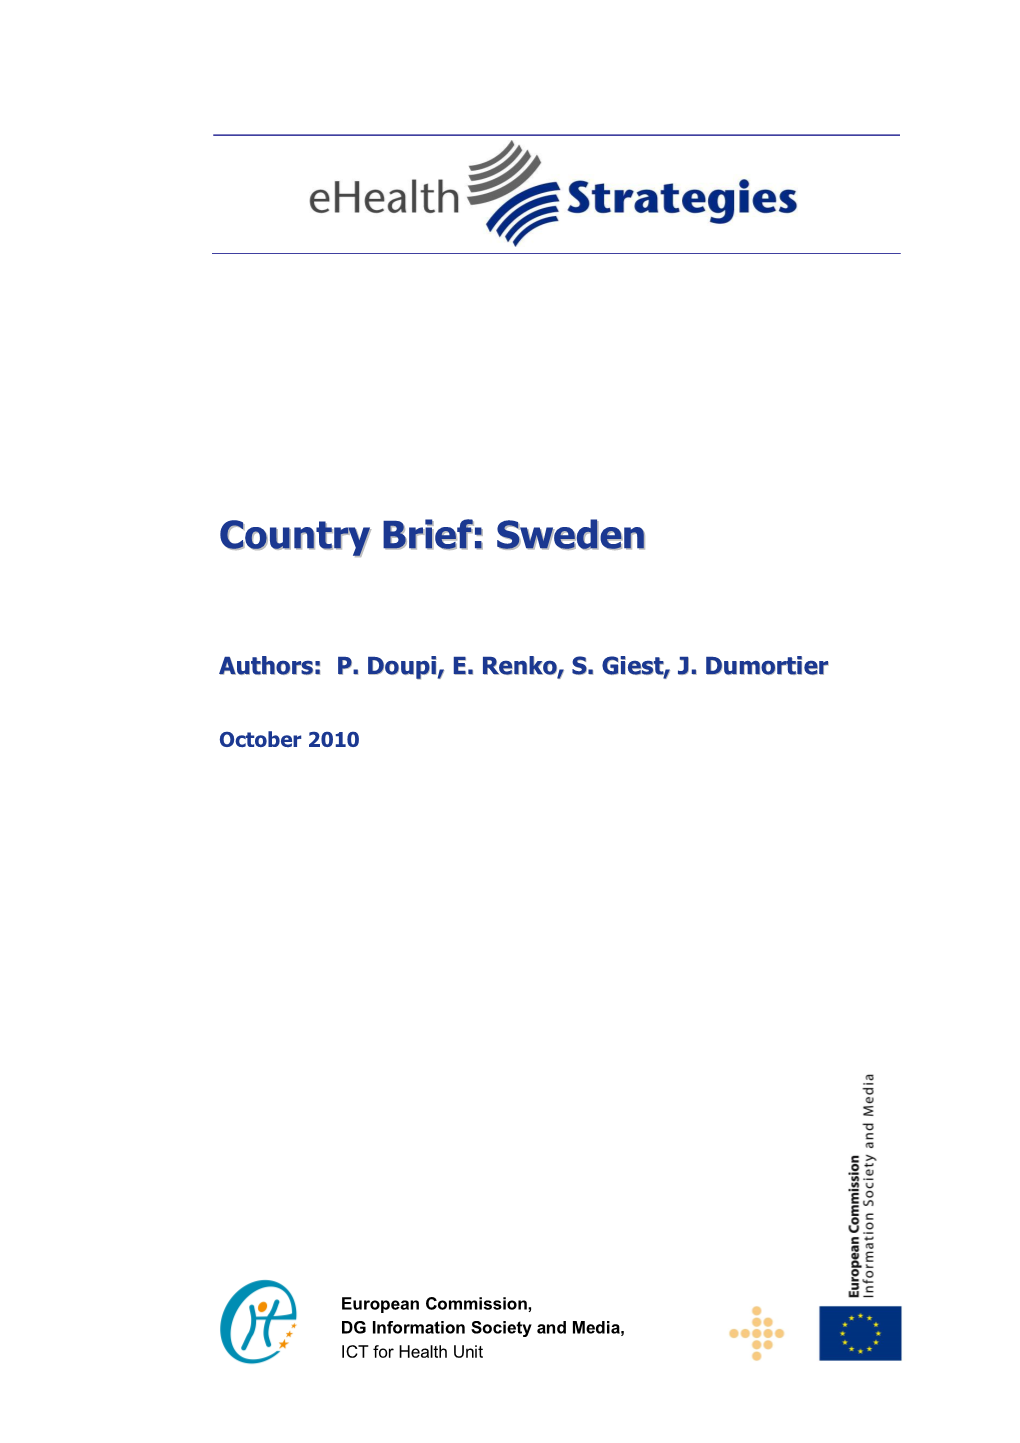 Country Brief Sweden. Ehealth Strategies Report October 2010